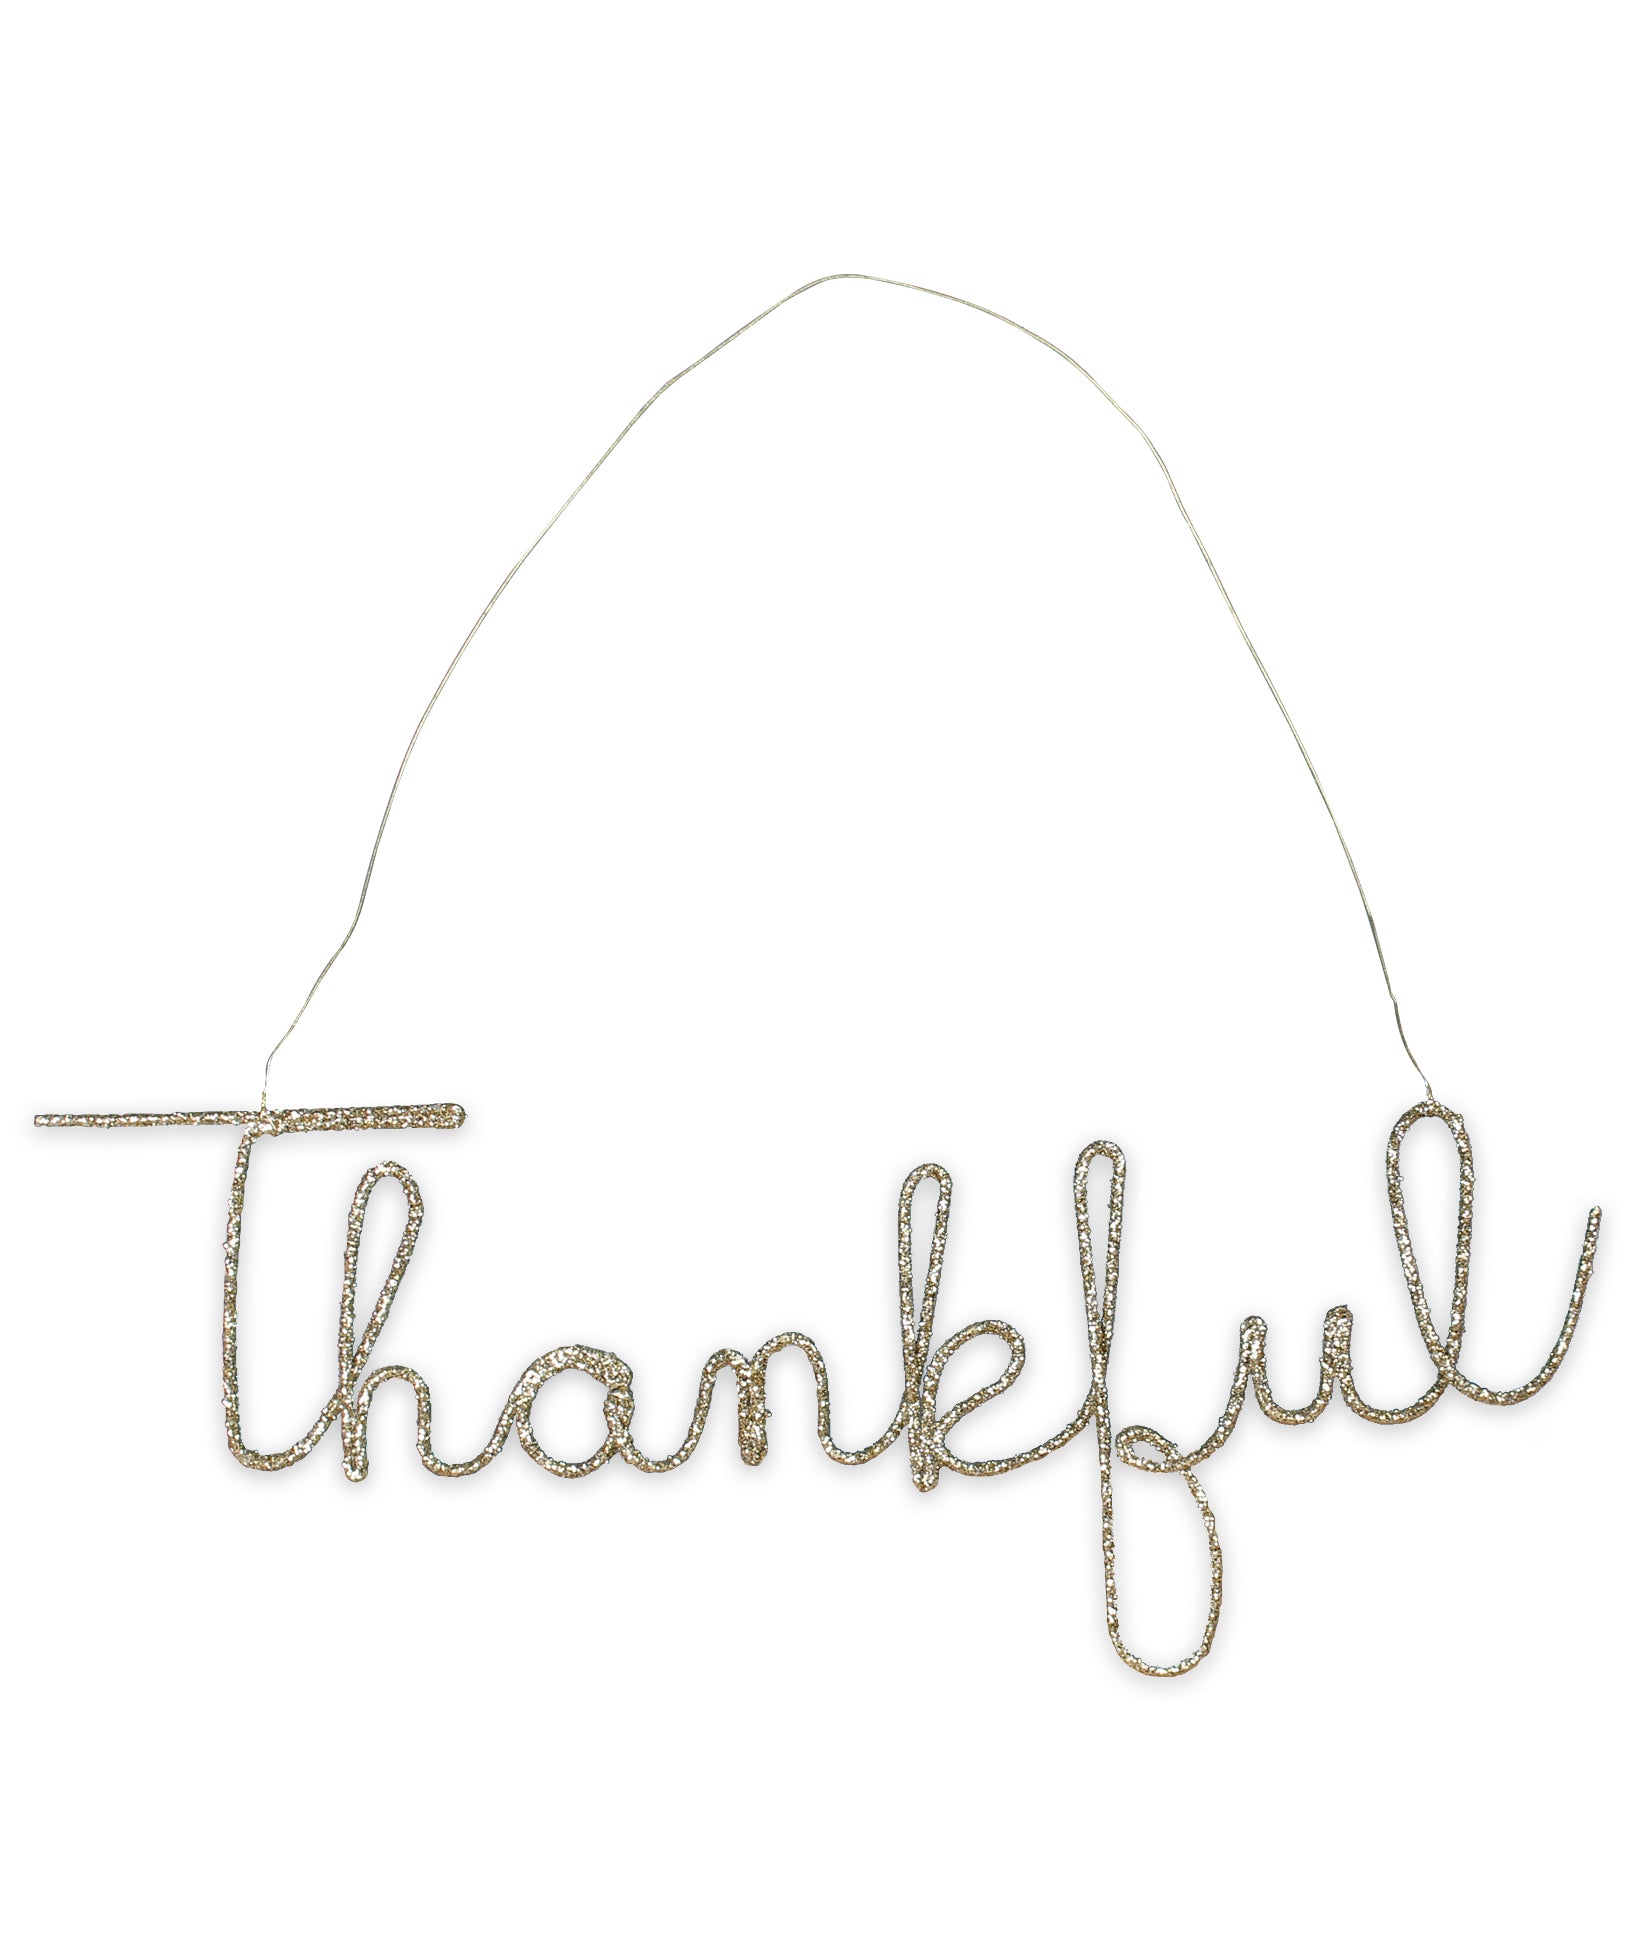 thankful_wire_word_wall-hanging_glitter